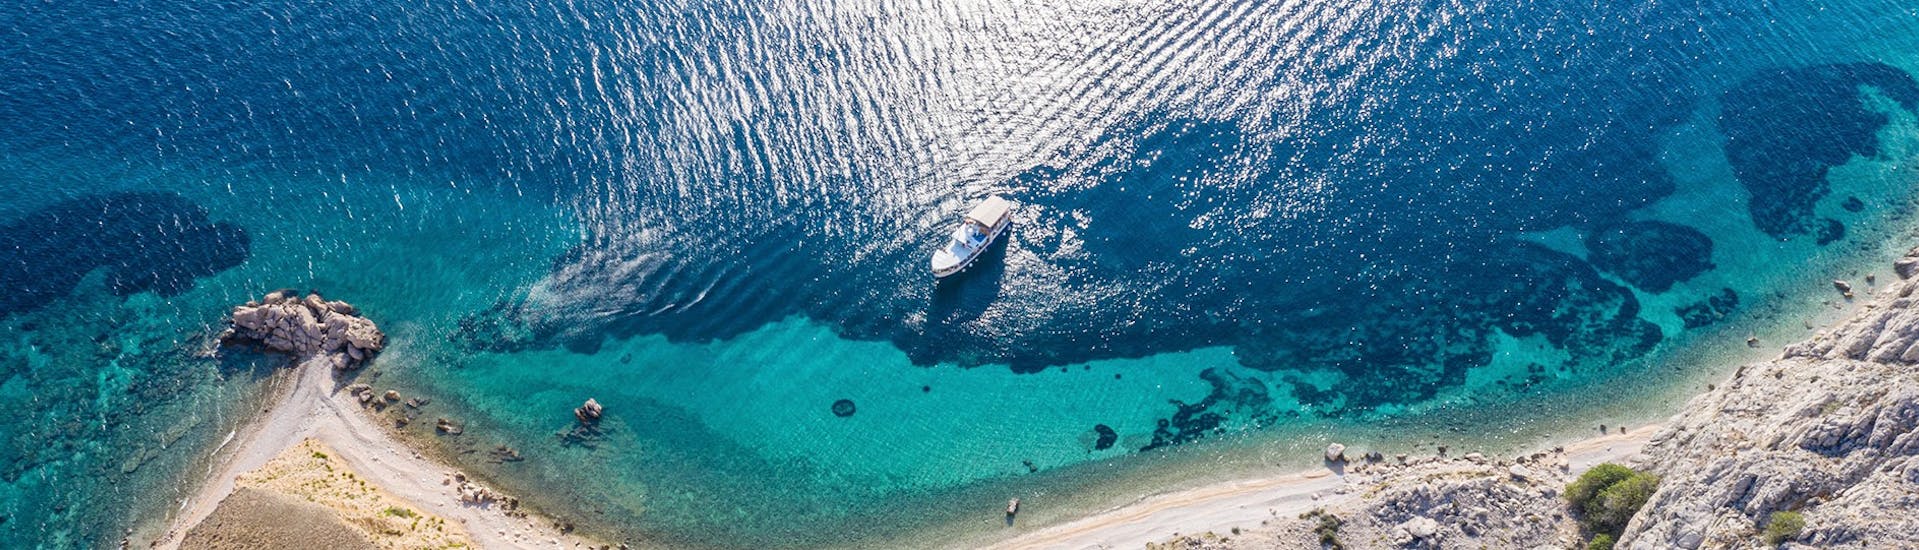 Top view of the boat from Excursions Bura Baška during the 4 island tour.